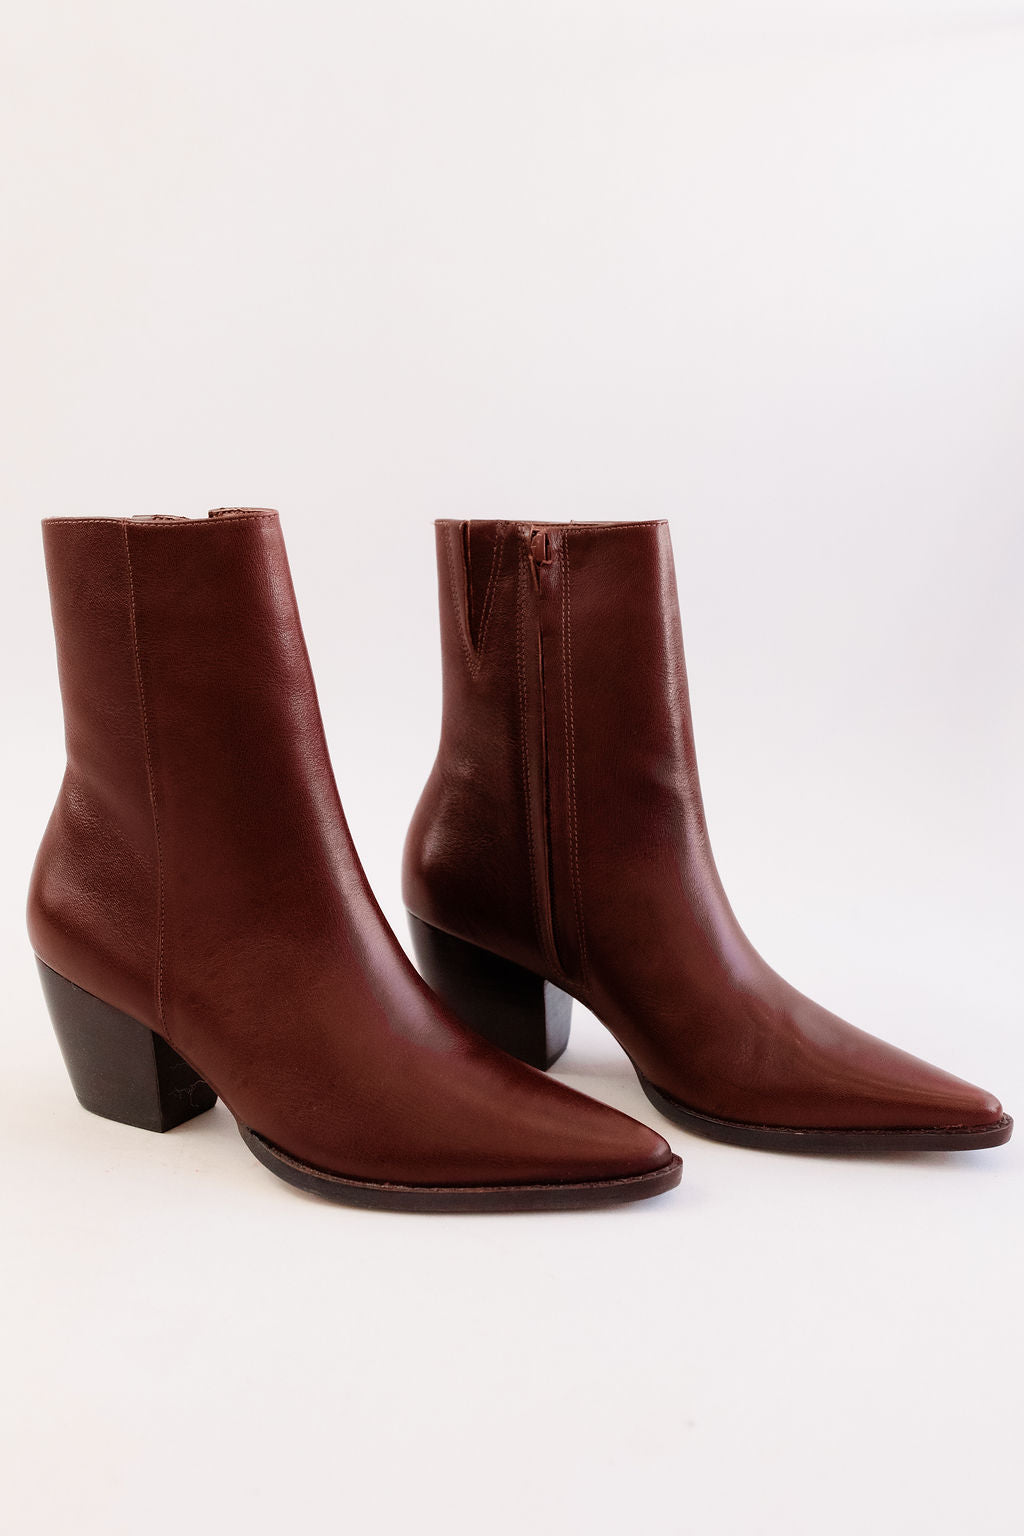 Matisse | Caty Ankle Boot | Bourbon - Poppy and Stella